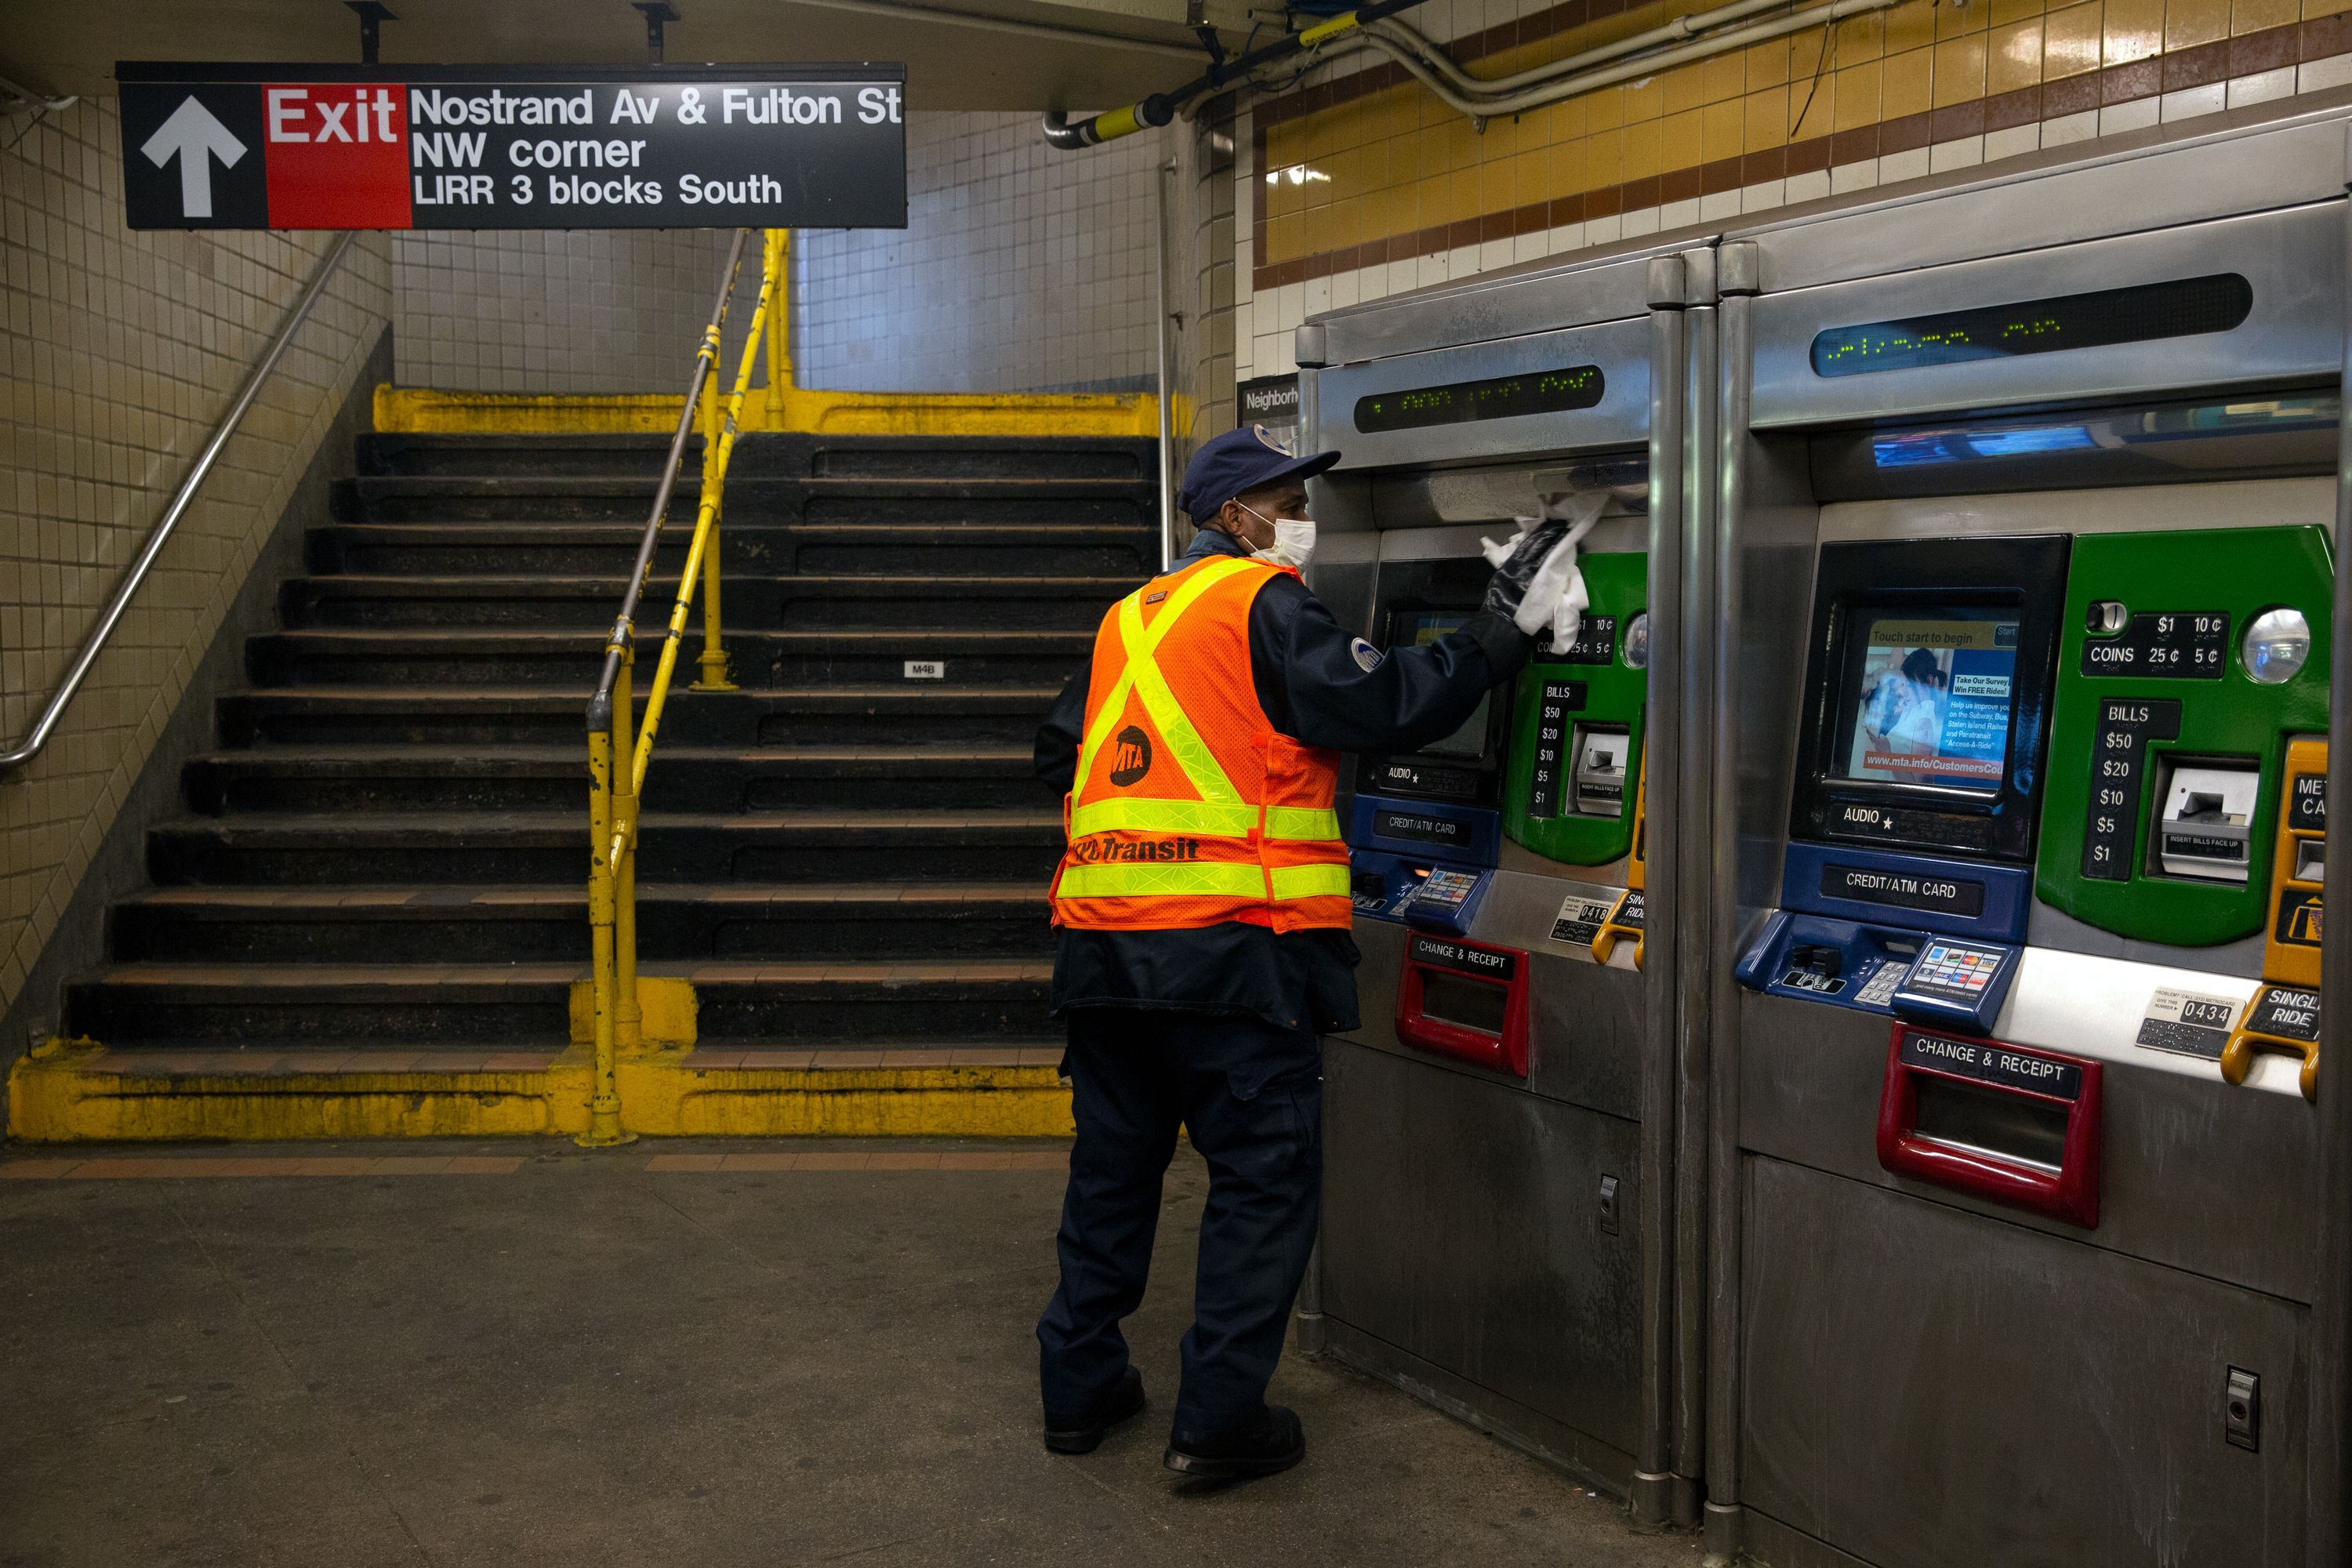 An MTA workers disinfects the Nostrand Avenue station during the coronavirus outbreak.